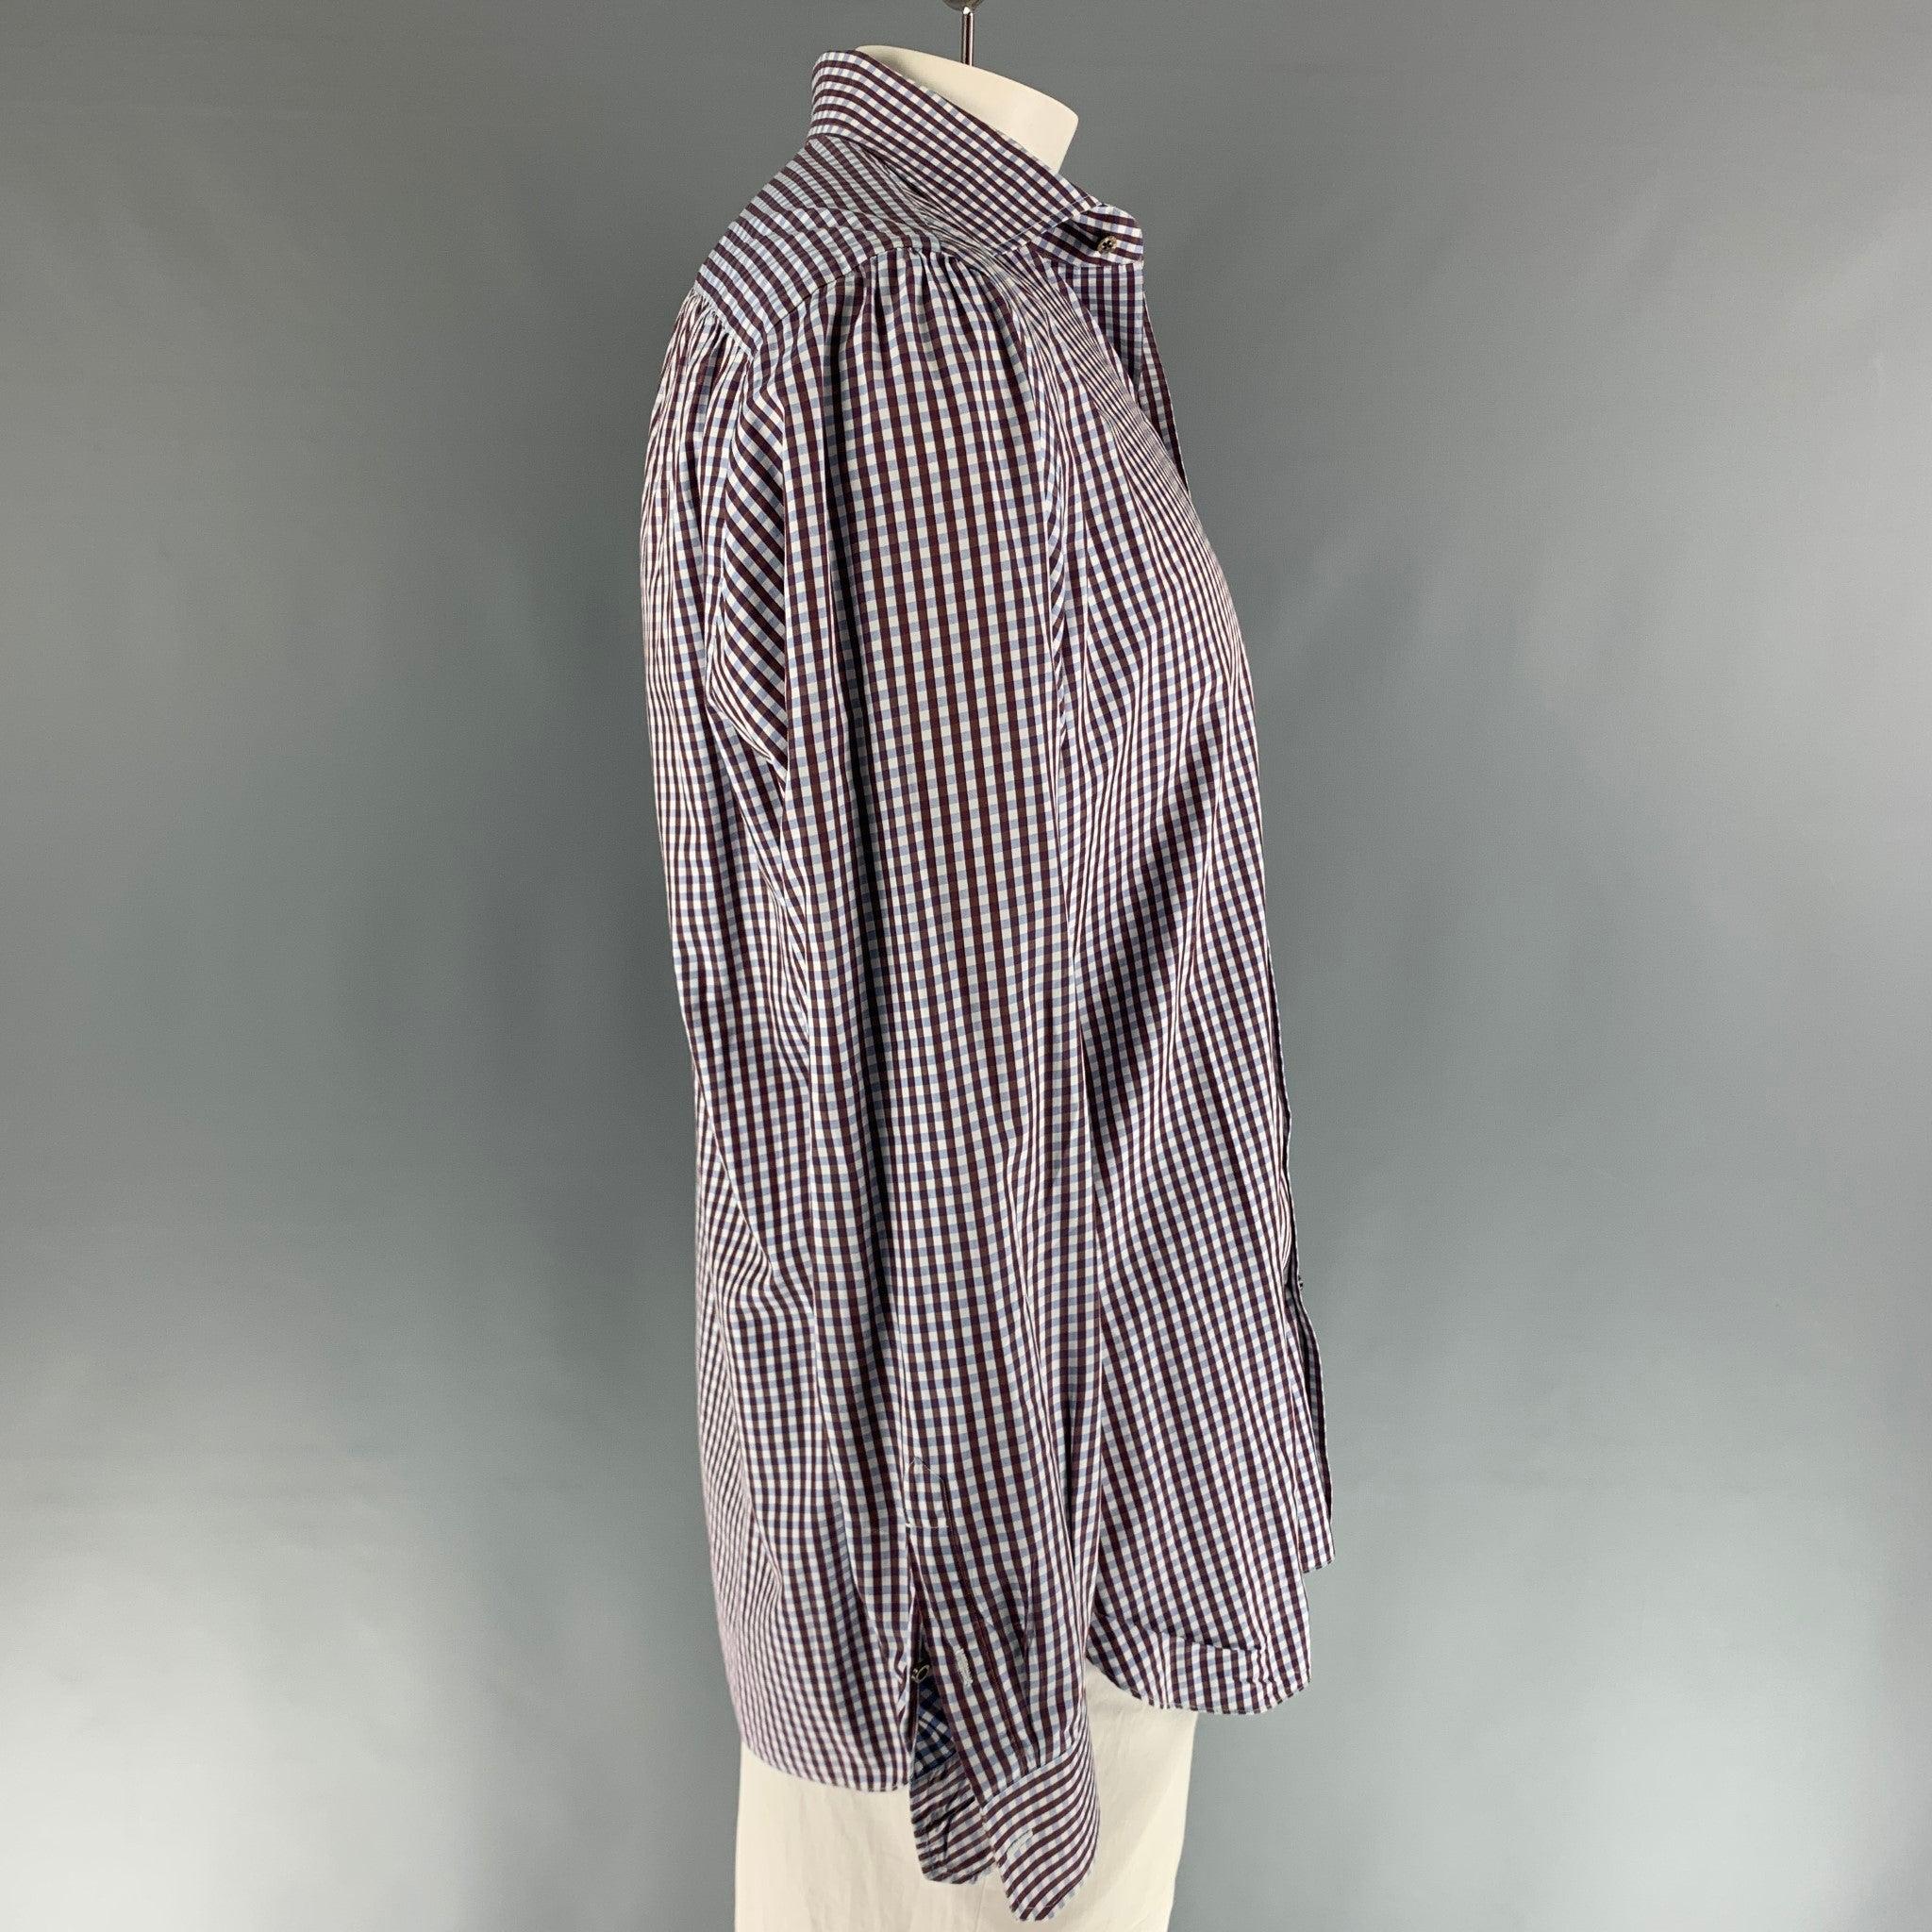 ISAIA long sleeve button down shirt features a brown and blue checkered design and a spread collar. 100% cotton. Made in Italy.
Very Good Pre-Owned Condition. 

Marked:   43 & 17
 

Measurements: 
  
Shoulder: 19 inches Chest: 48 inches Sleeve: 26.5